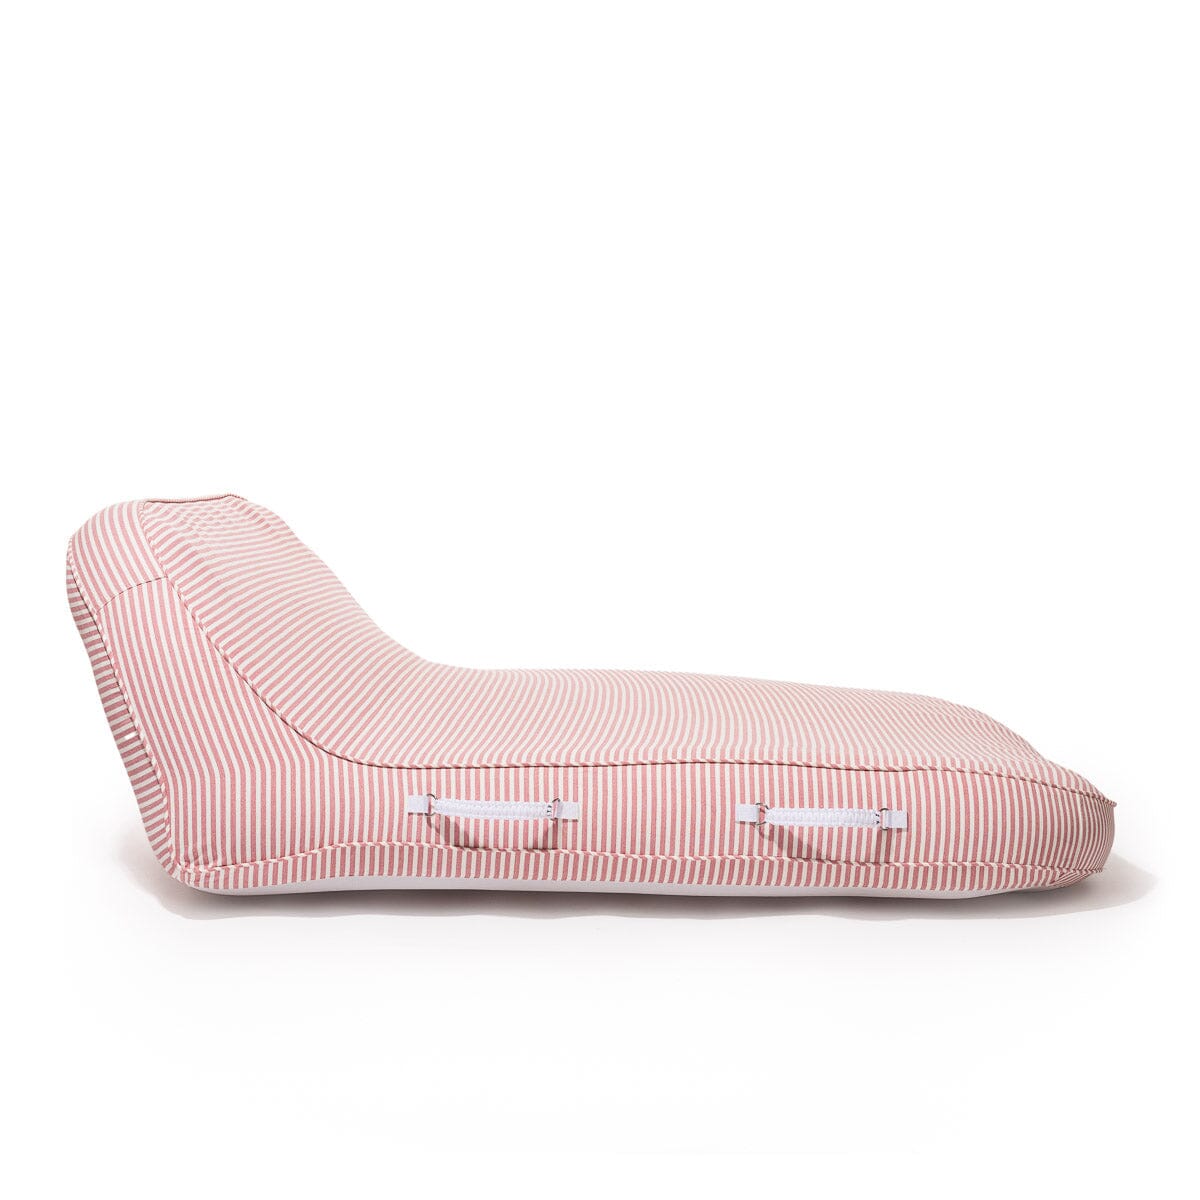 The XL Pool Lounger - Laurens Pink Stripe Pool Lounger Business & Pleasure Co 